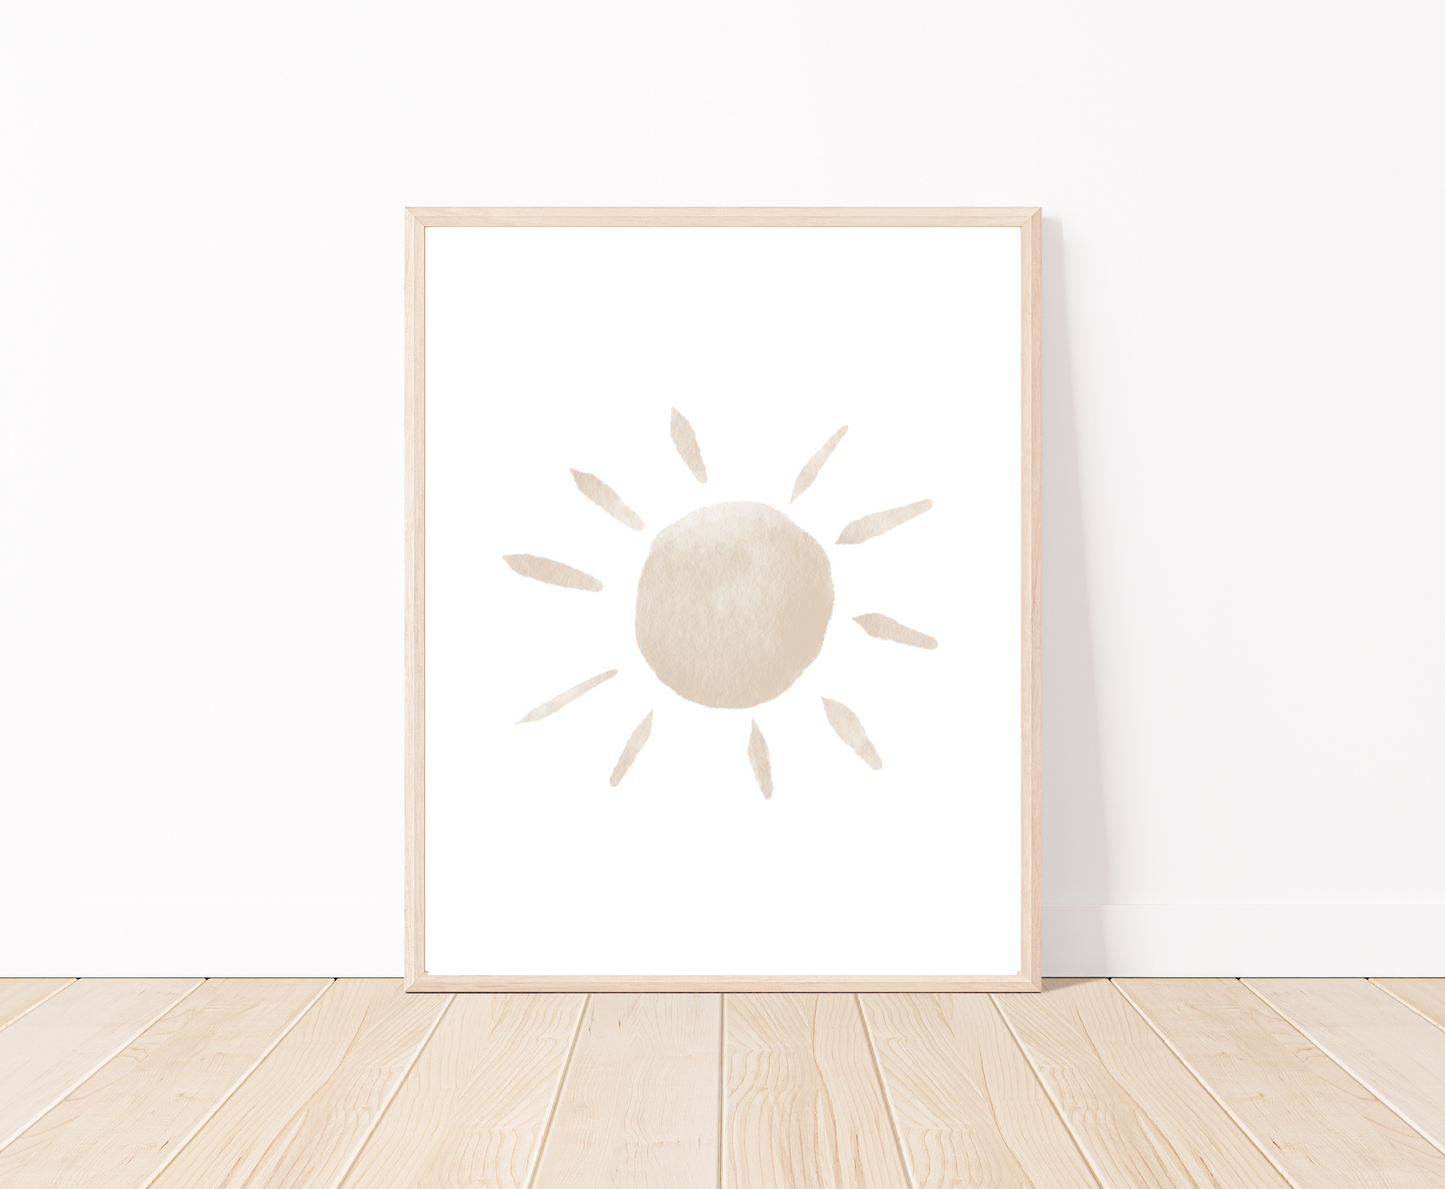 A frame showing a digital graphic displaying an almond-beige sun on a parquet floor.